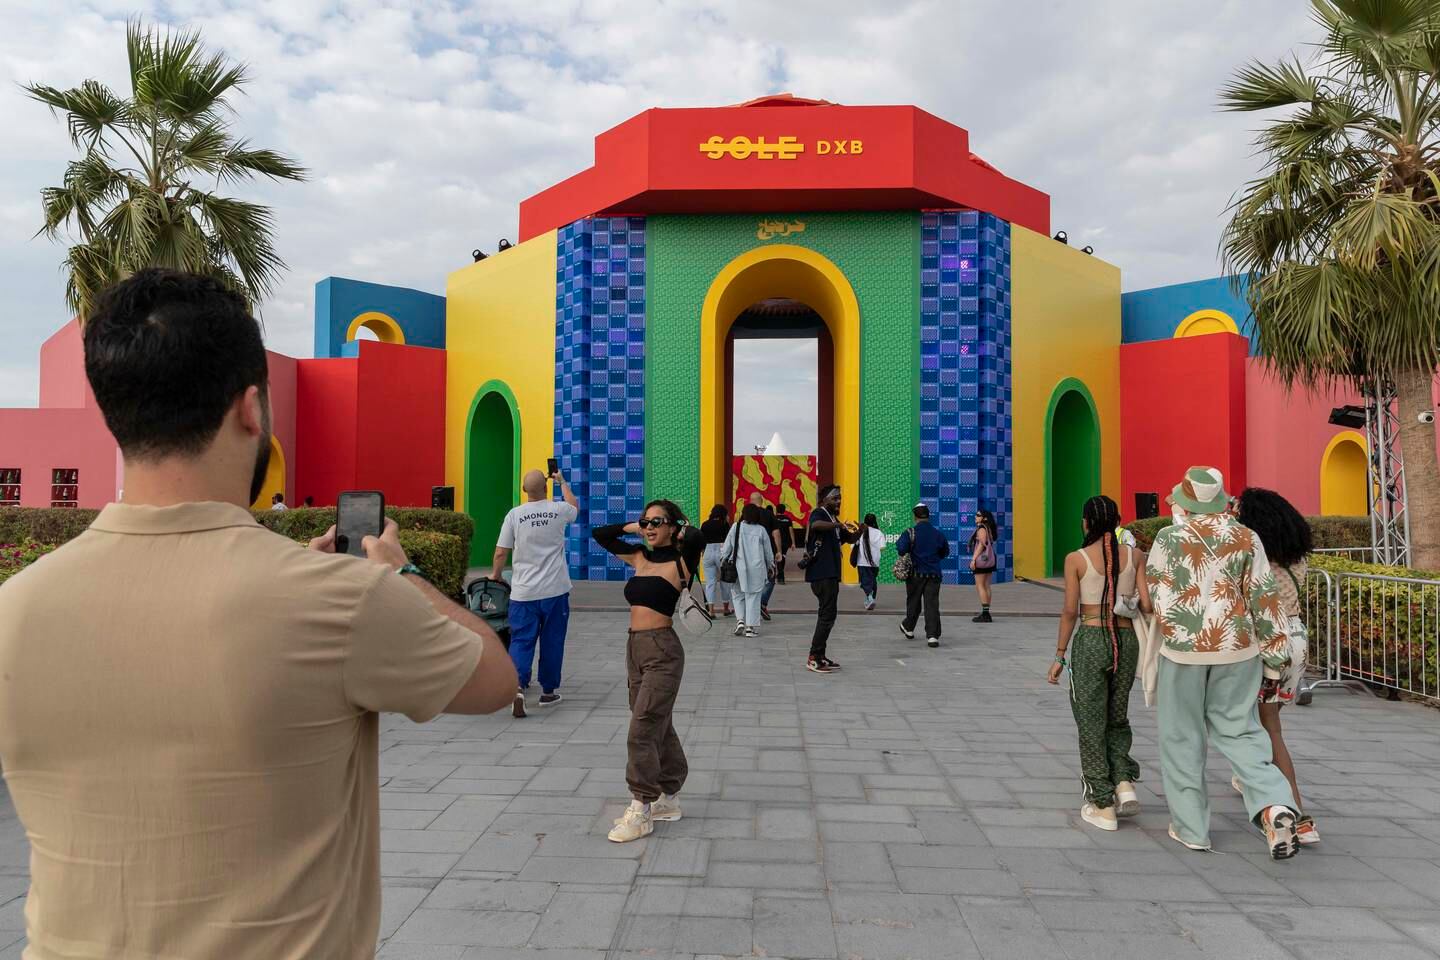 The main entry gate to Sole DXB Event at Dubai Design District. Antonie Robertson / The National


